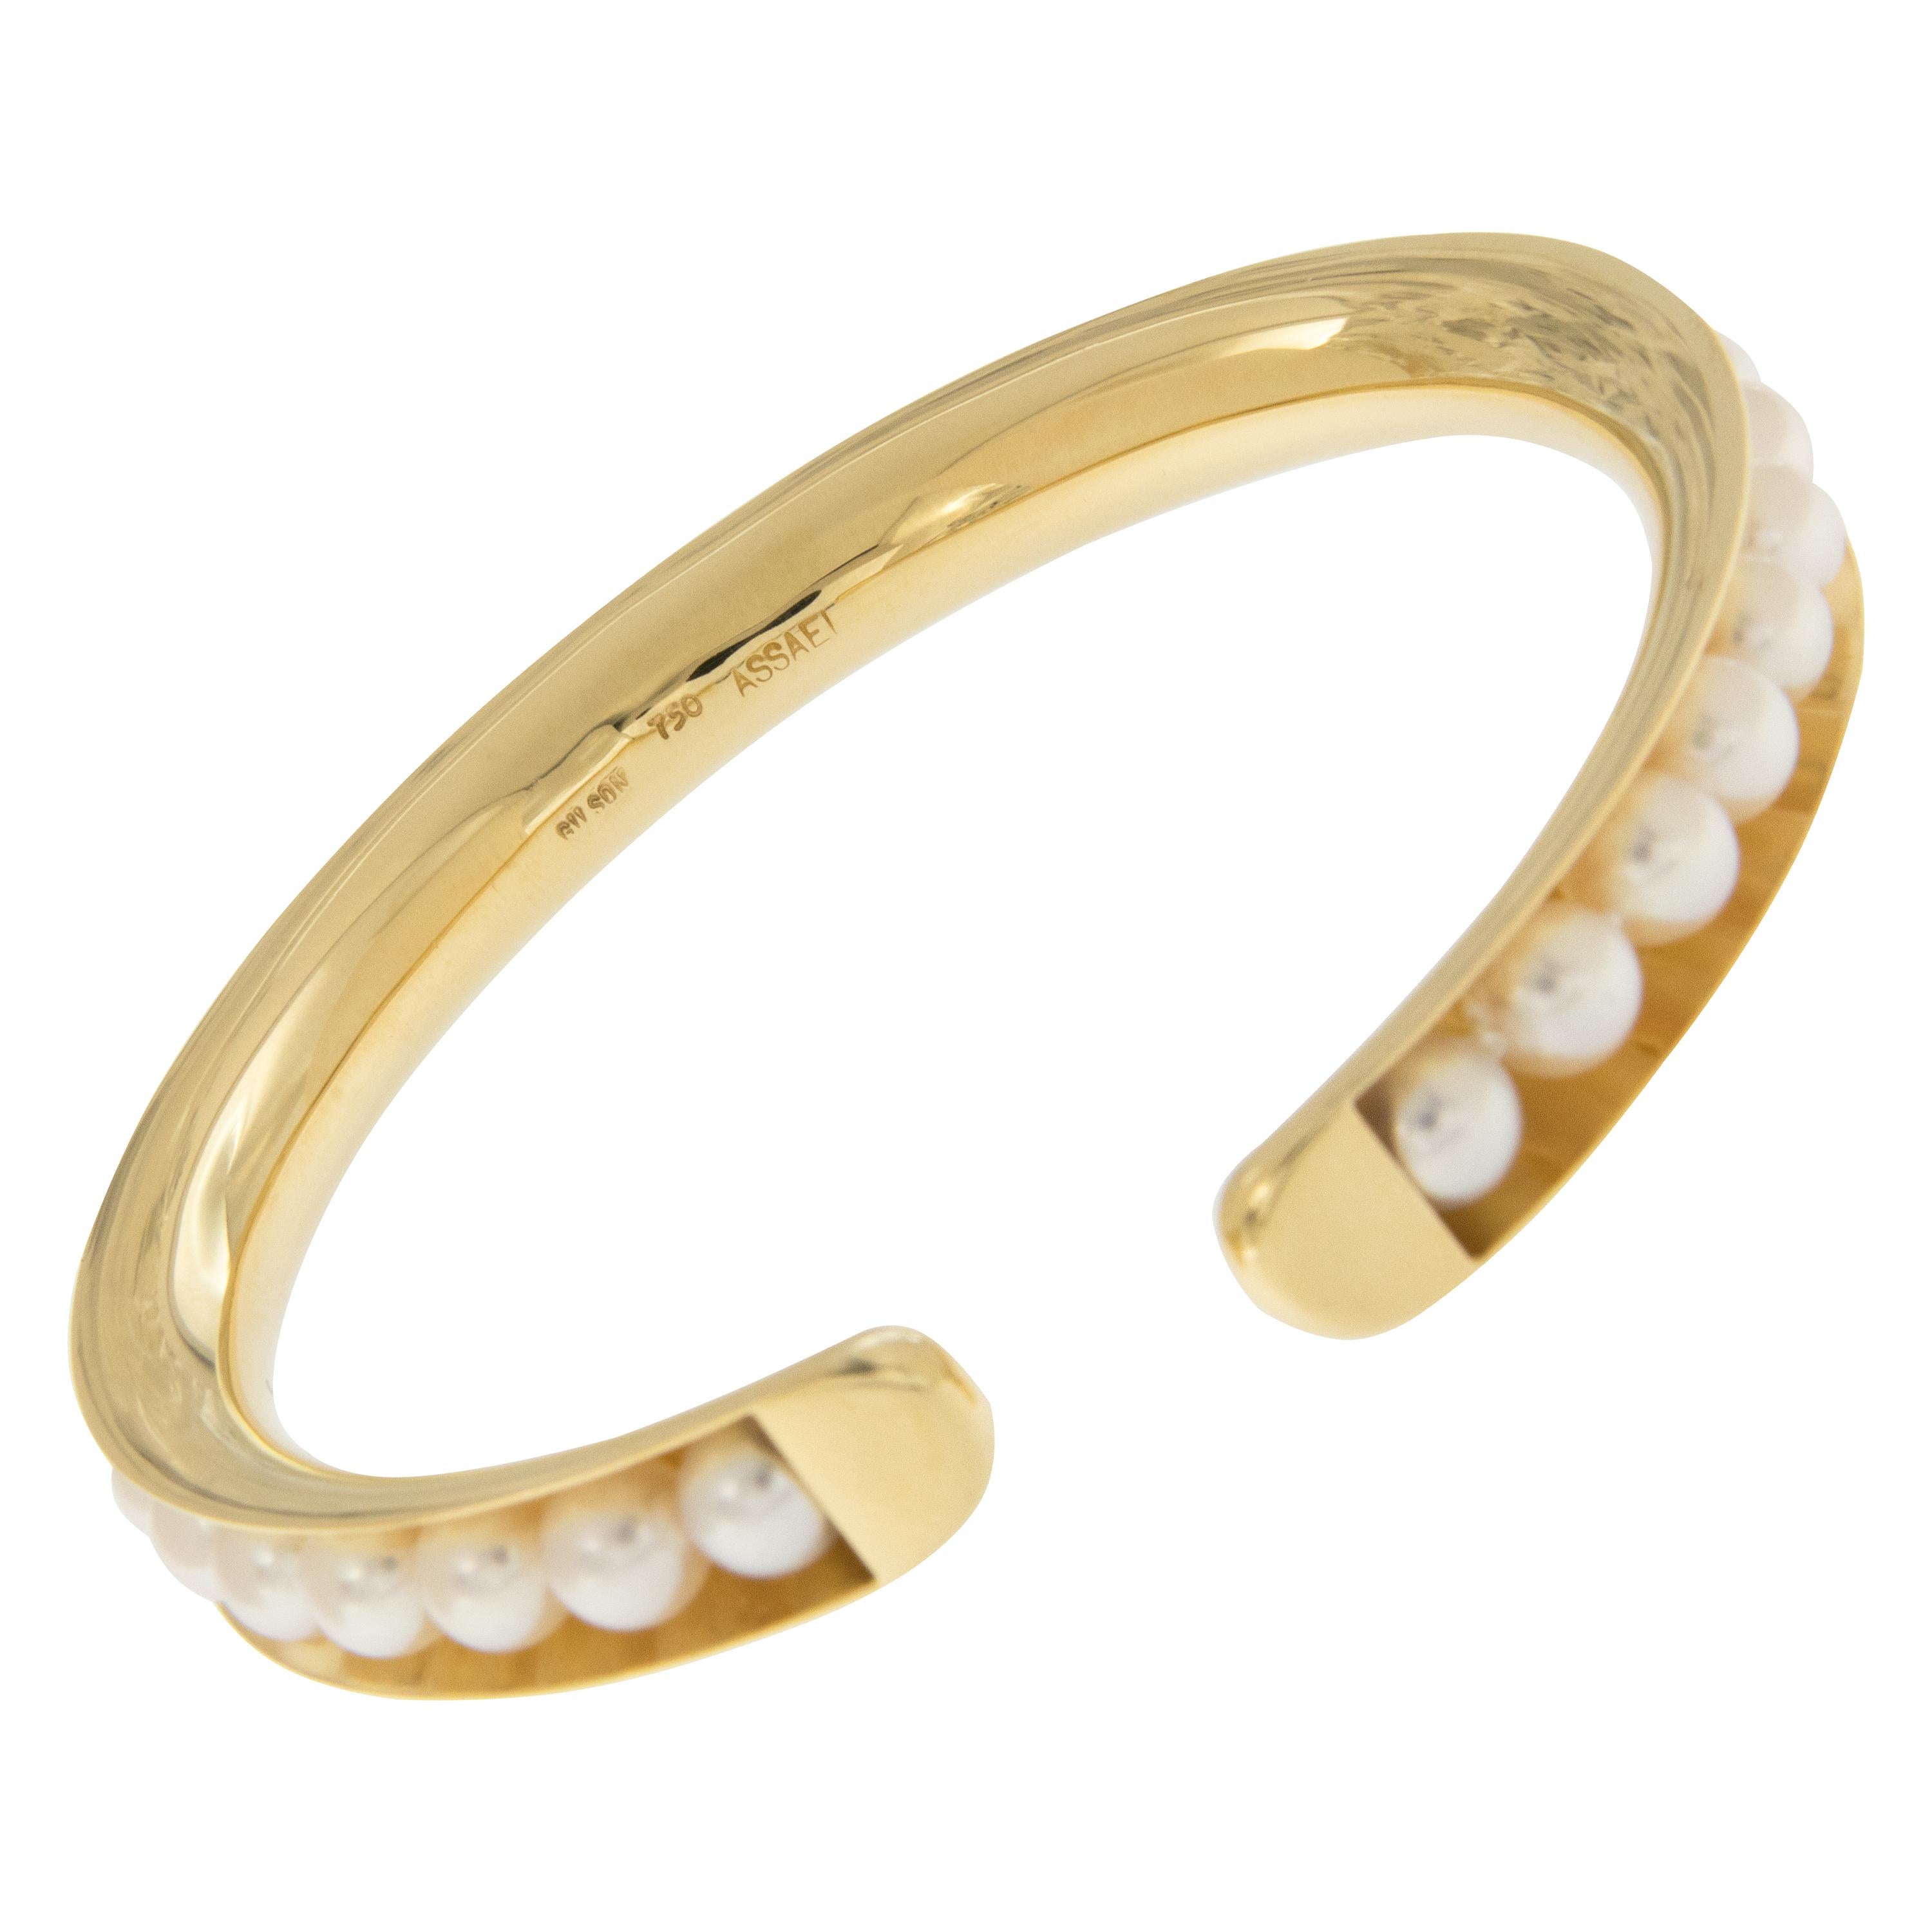 2020 AGTA Spectrum Spotlight Award & Cultured Pearl Association of America’s 2018 Spotlight Award, the Flex Bangle by Sean Gilson for Assael features lustrous Akoya Cultured Pearls set in 18K Yellow Gold. In a feat of ingenuity, the Bangle is